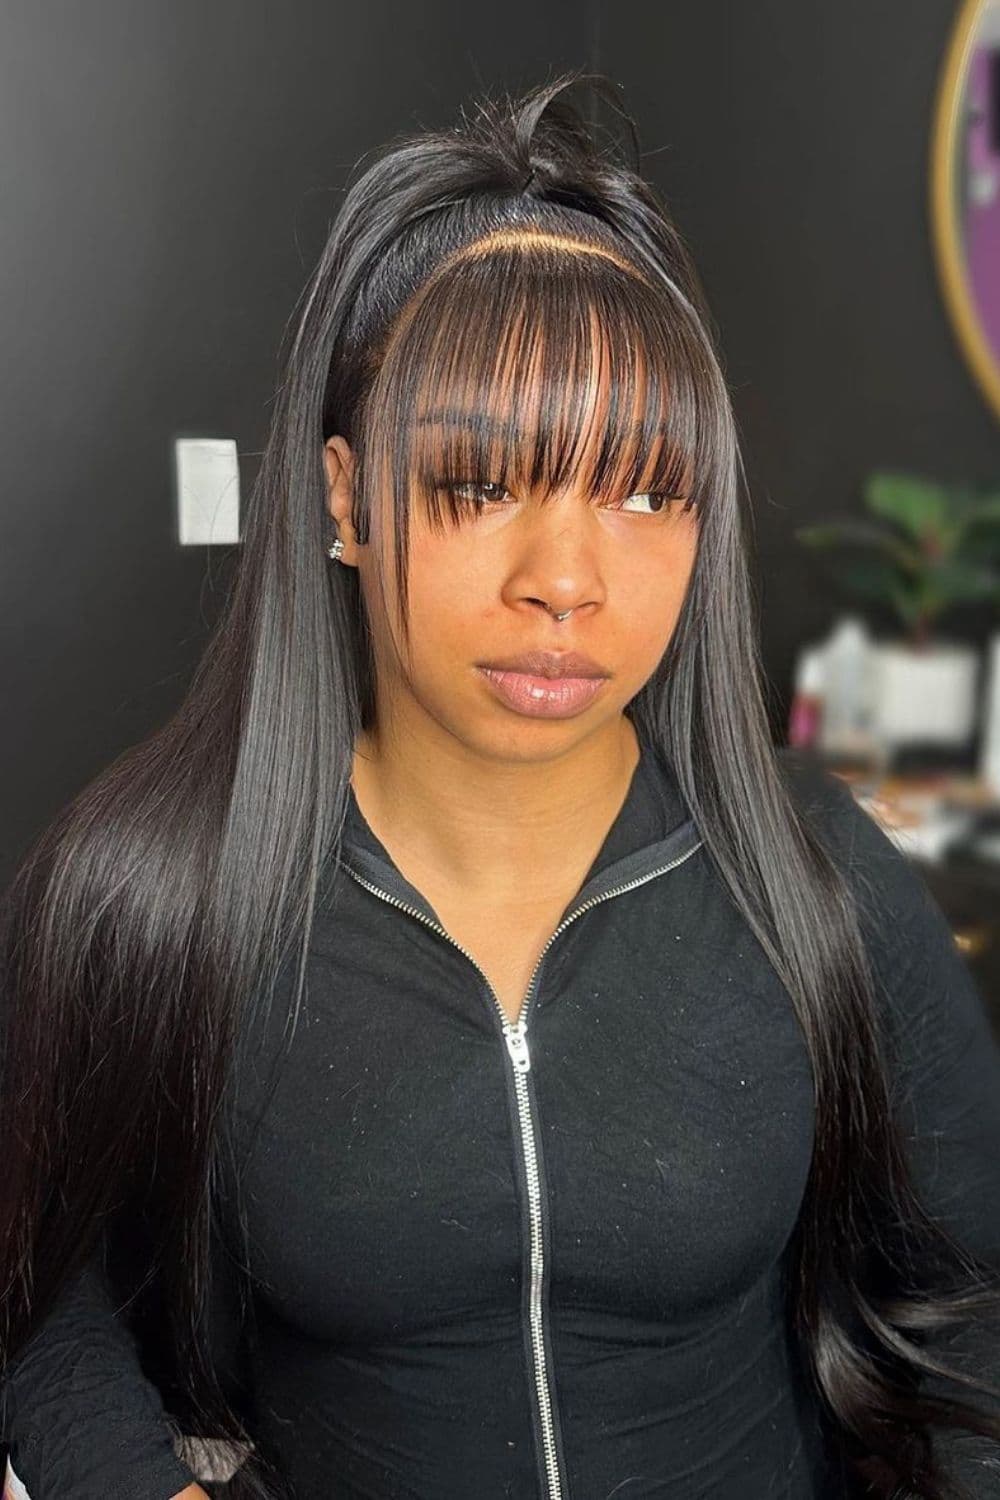 A woman with a straight, black wig hairstyle with bangs.